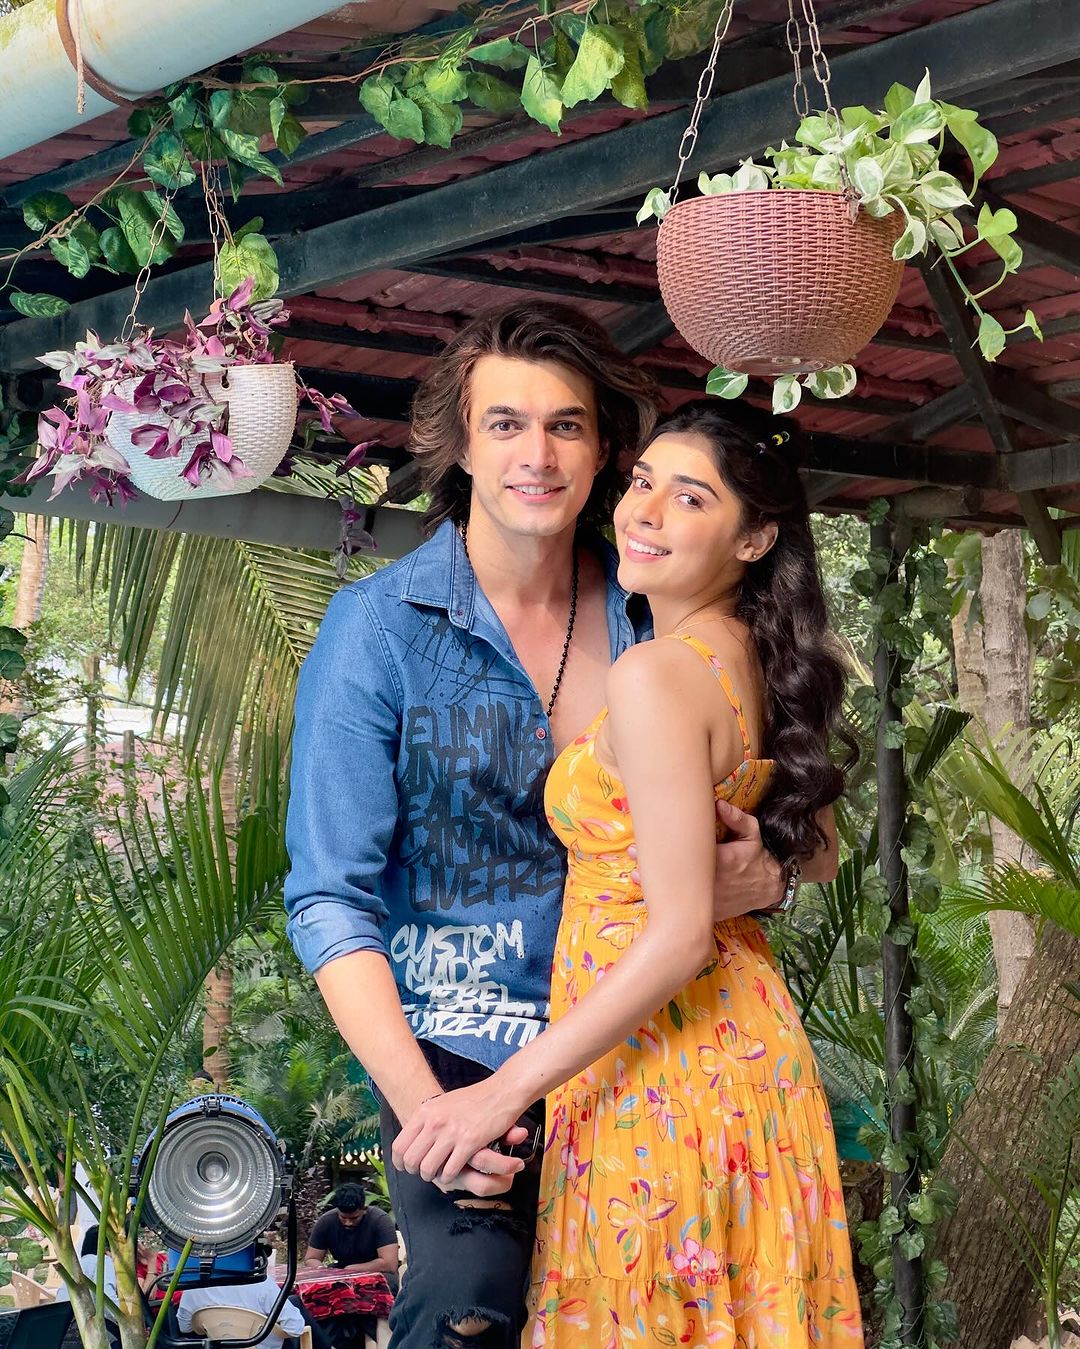 Beautiful Jab Mila Tu Duo Mohsin Khan And Eisha Singh Say About Portraying Maddy And Aneri. They Say How The Characters Connect With Them In Real Life.